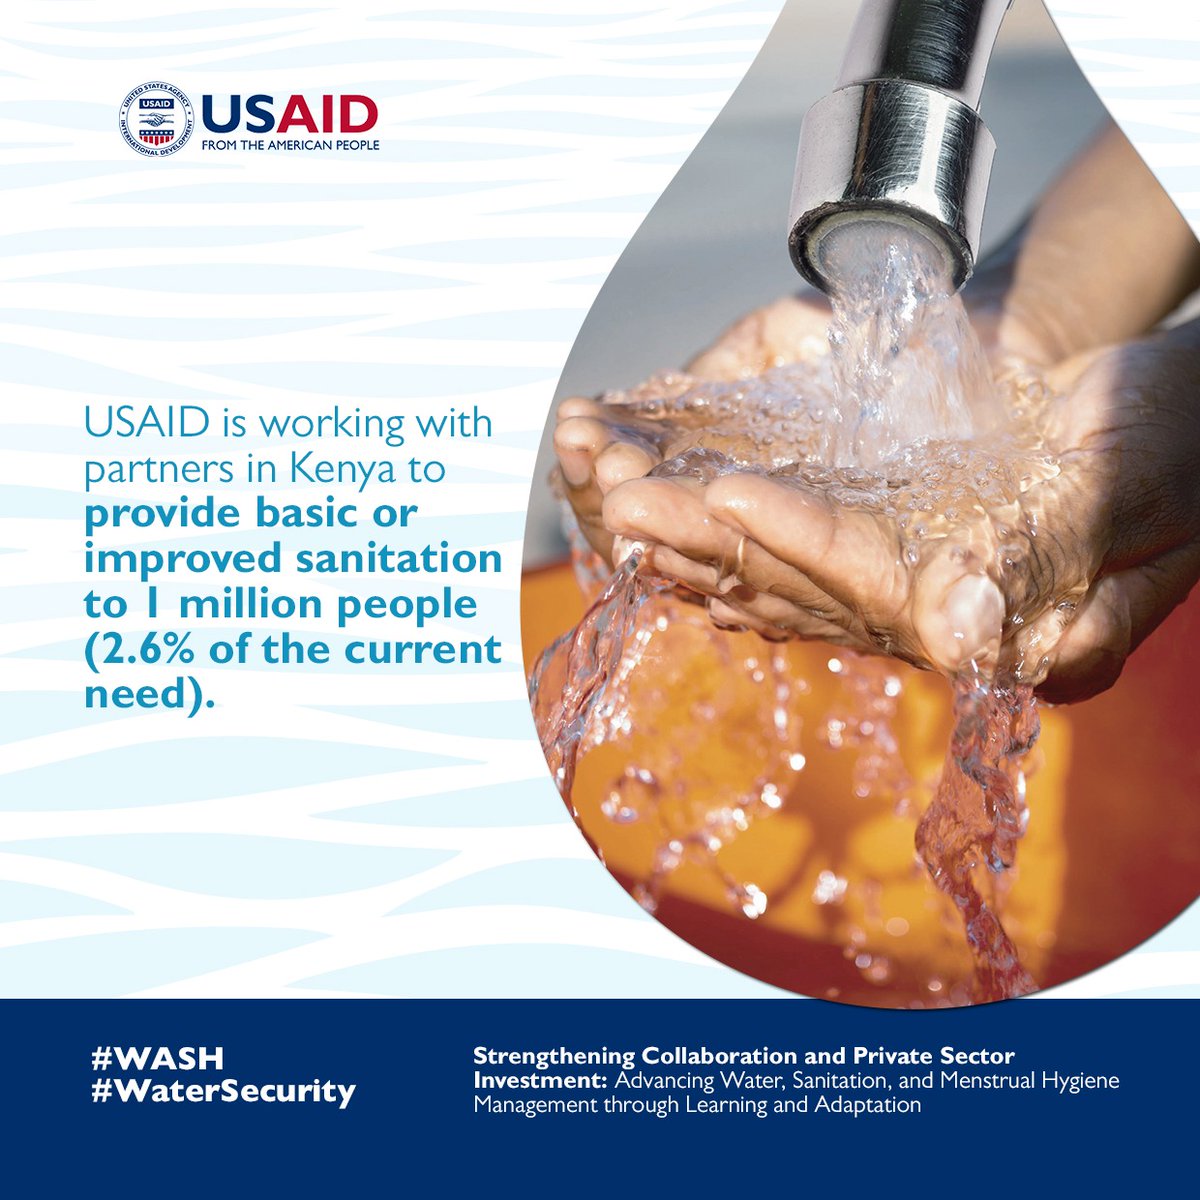 Reliable, progressive, and evidence based comprehensive data on water, sanitation, and hygiene is key to policy and decision makers at both the national and county levels. @USAIDKenya @USAIDWater @KiwashProject #WaterSecurity #WASH